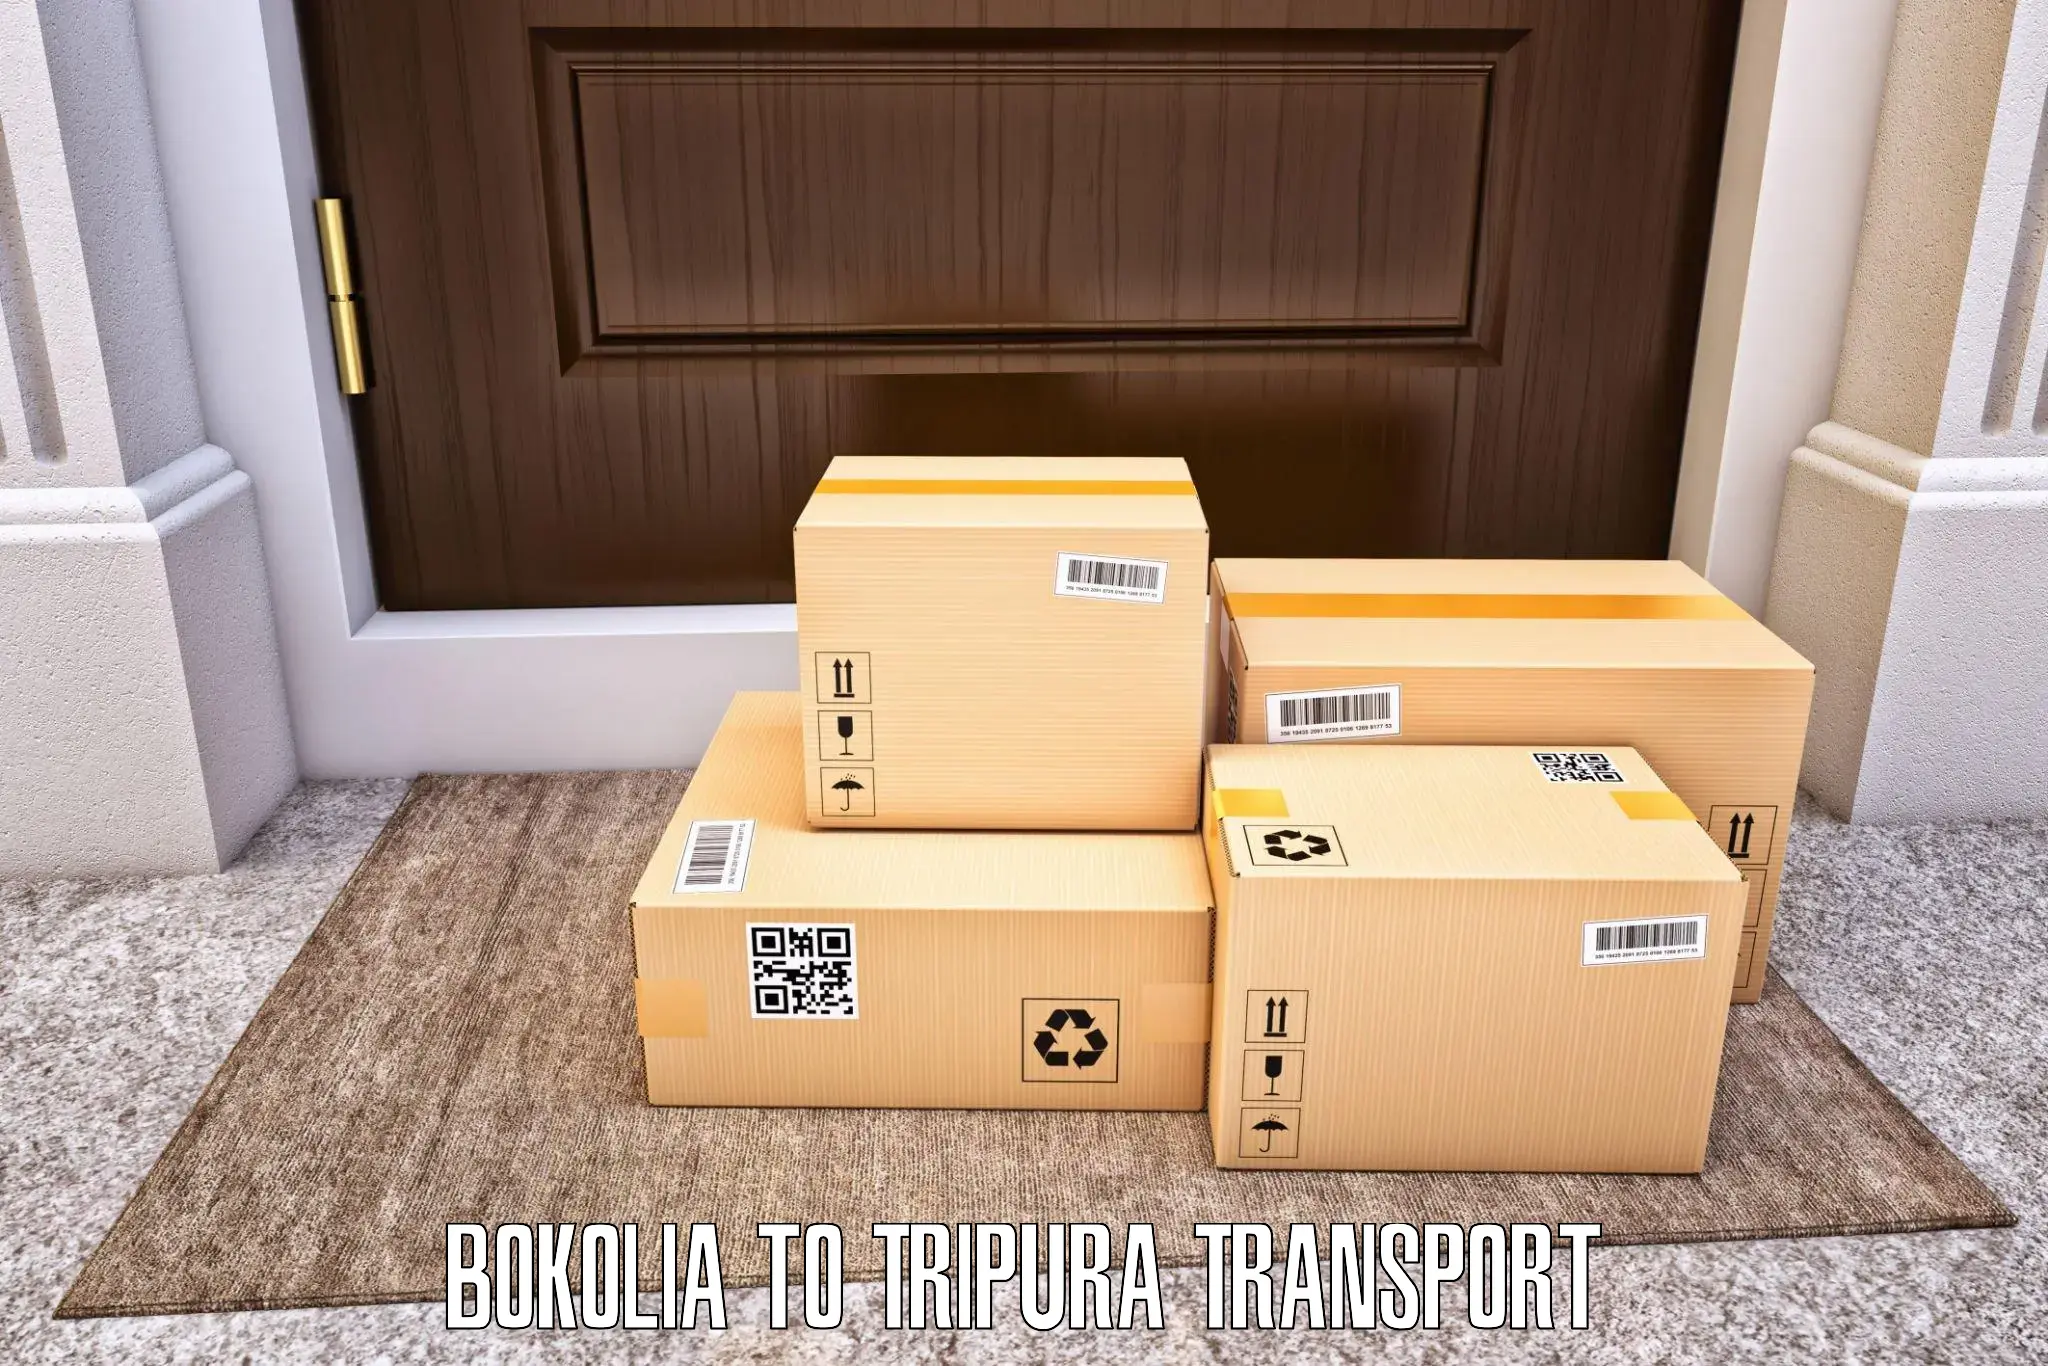 Material transport services Bokolia to Aambasa